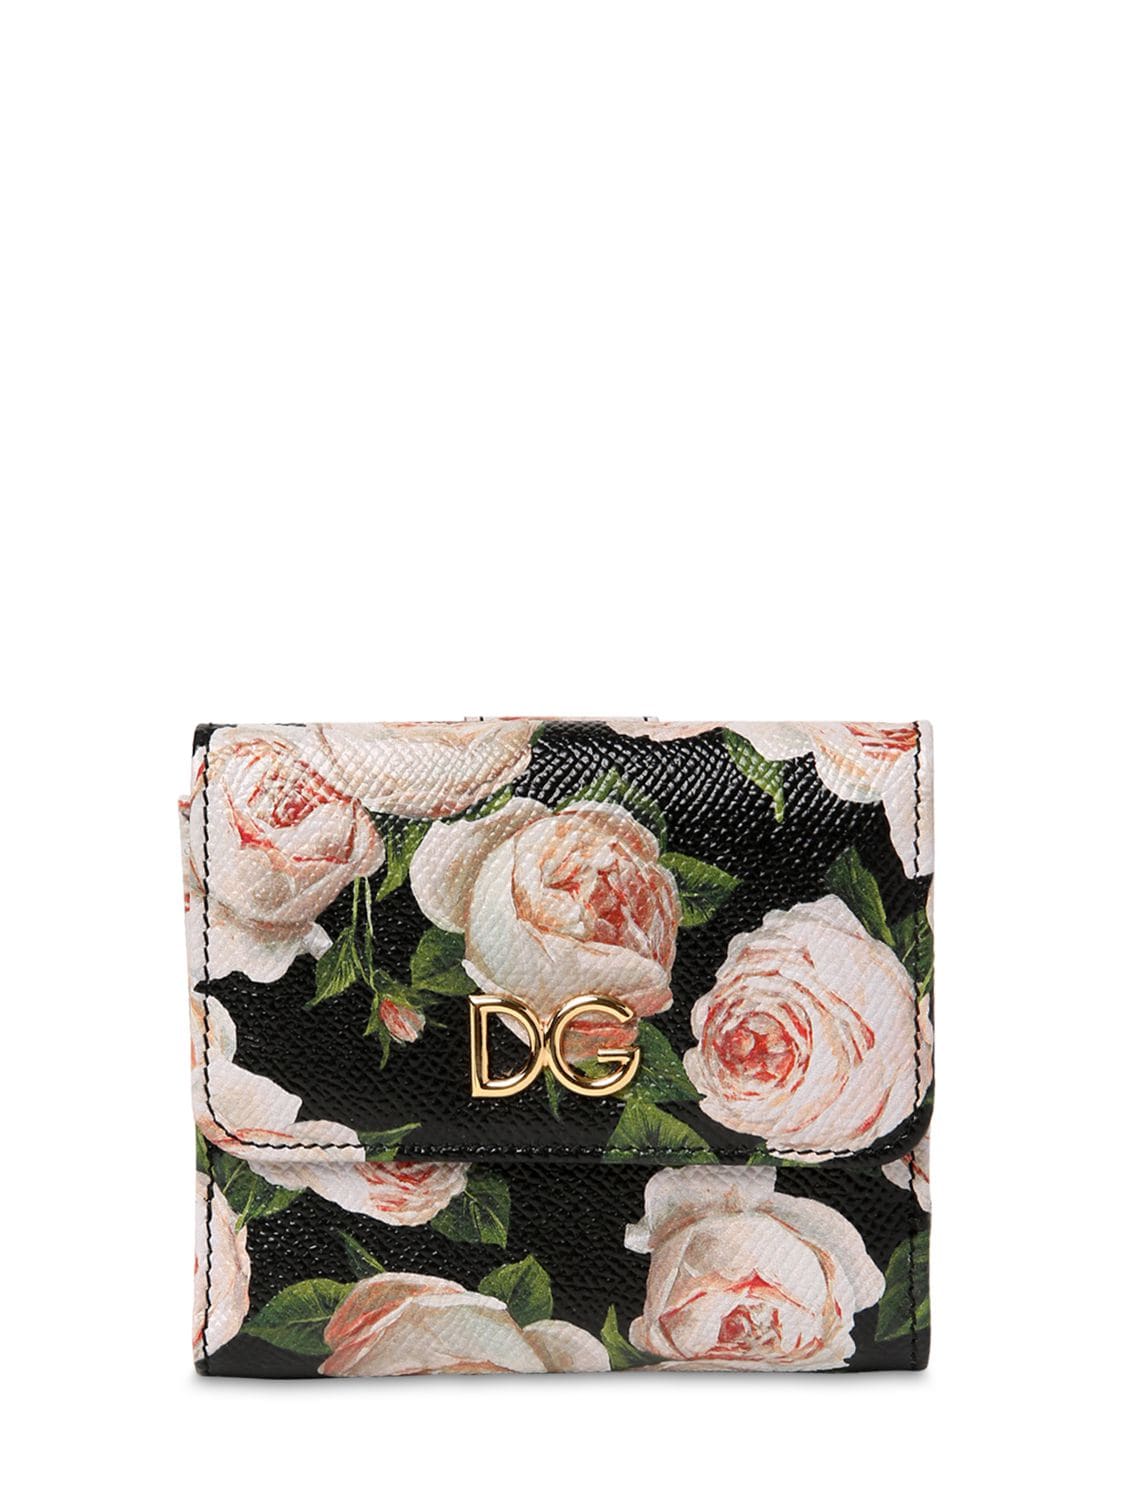 Dolce & Gabbana Floral Print Dauphine Leather Wallet In Black